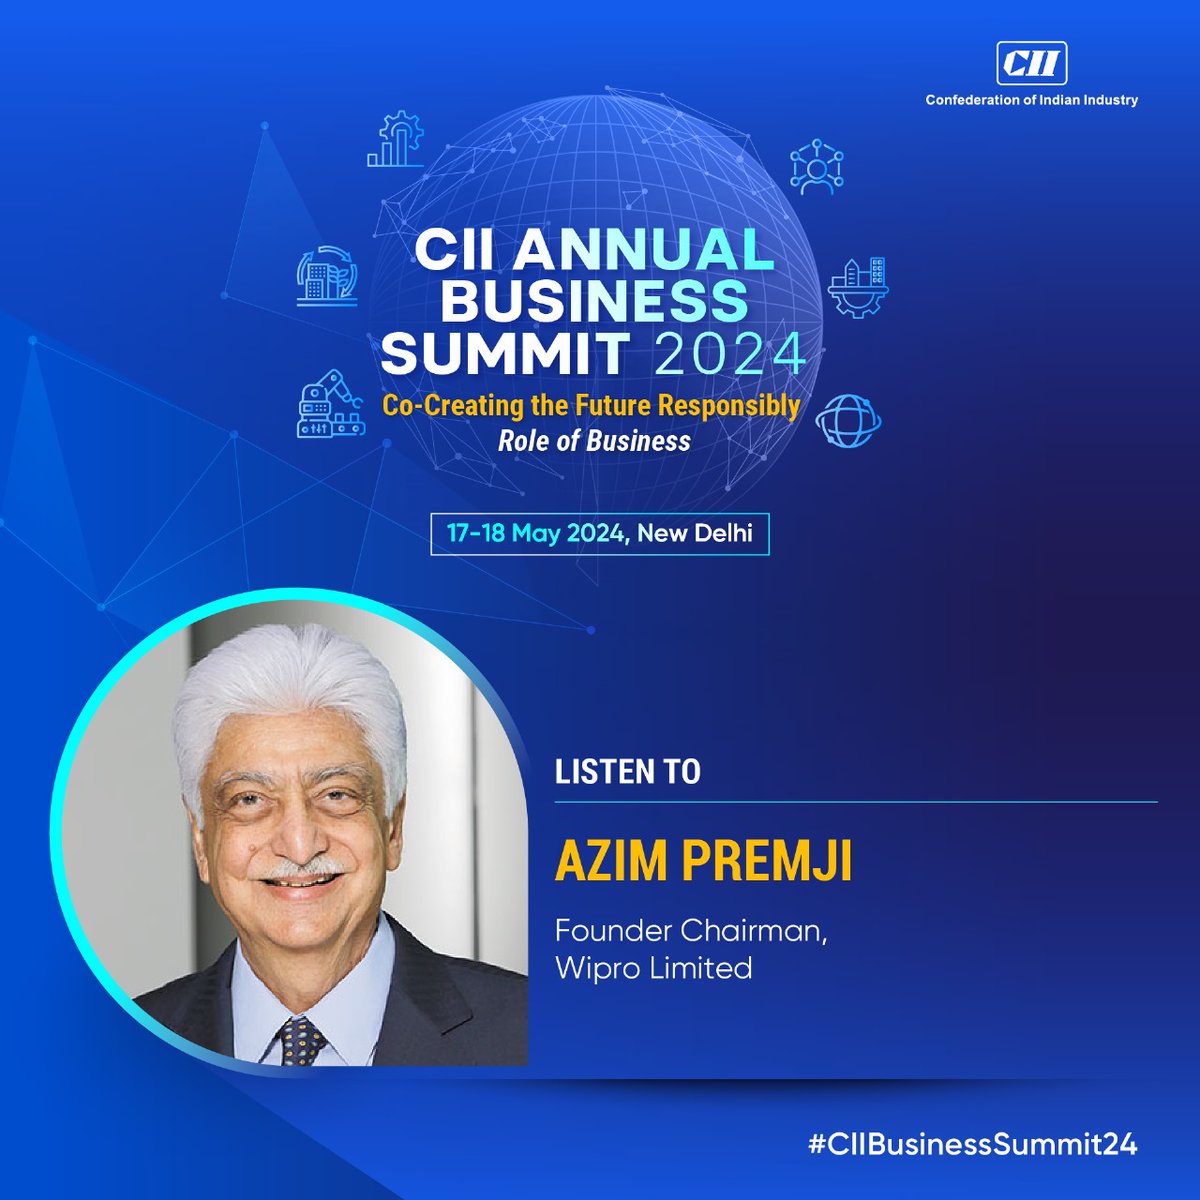 Listen to Azim Premji, Founder Chairman, @Wipro Limited share insights at the CII Annual Business Summit 2024! Gather deep insights as top minds from the government and industry draw the roadmap towards a developed India. Block your calendar ➡17-18 May